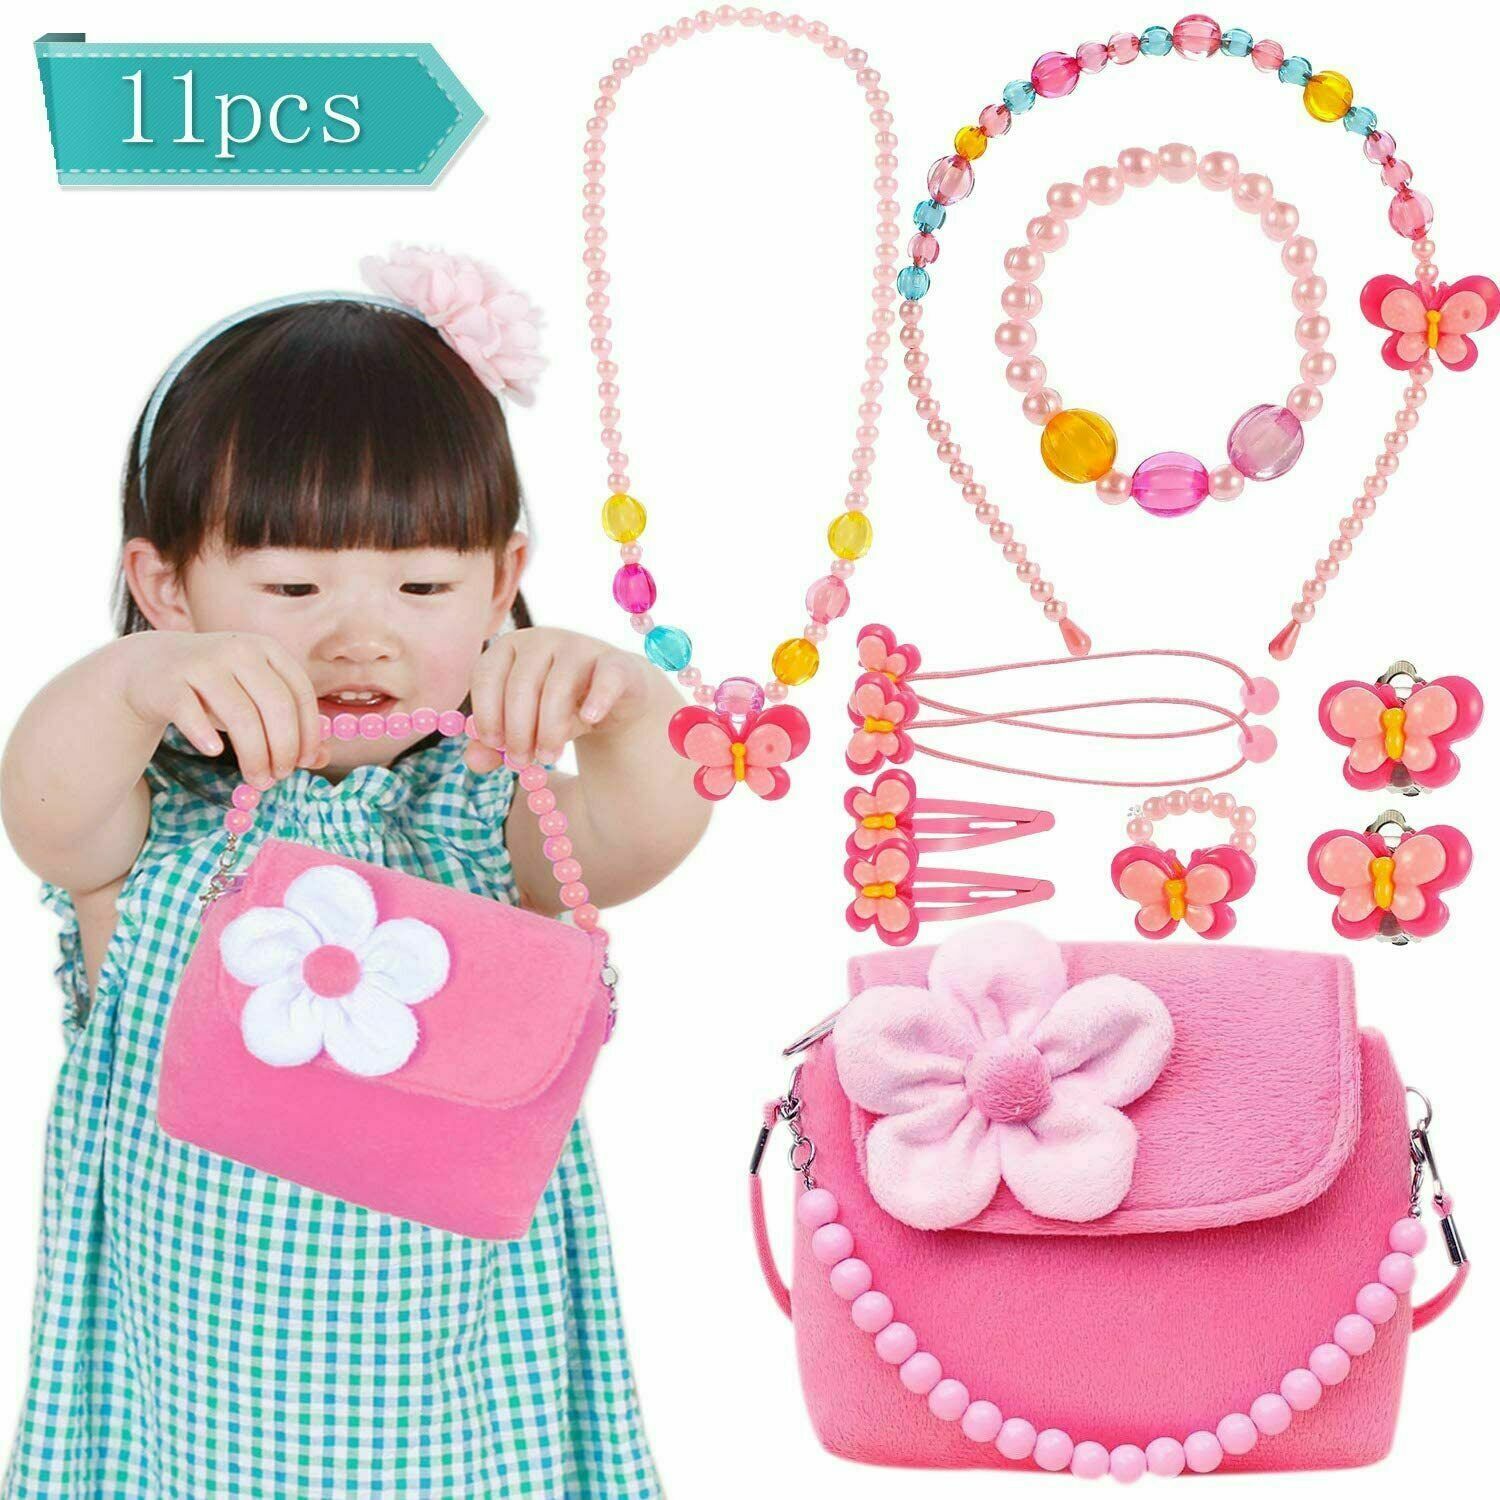 SPECOOL Kids Jewelry Little Girls Plush Handbag Necklace Bracelet Earrings  Ring Hair Clips Set, Princess Costume Jewelry Party Favors Gift for Dress